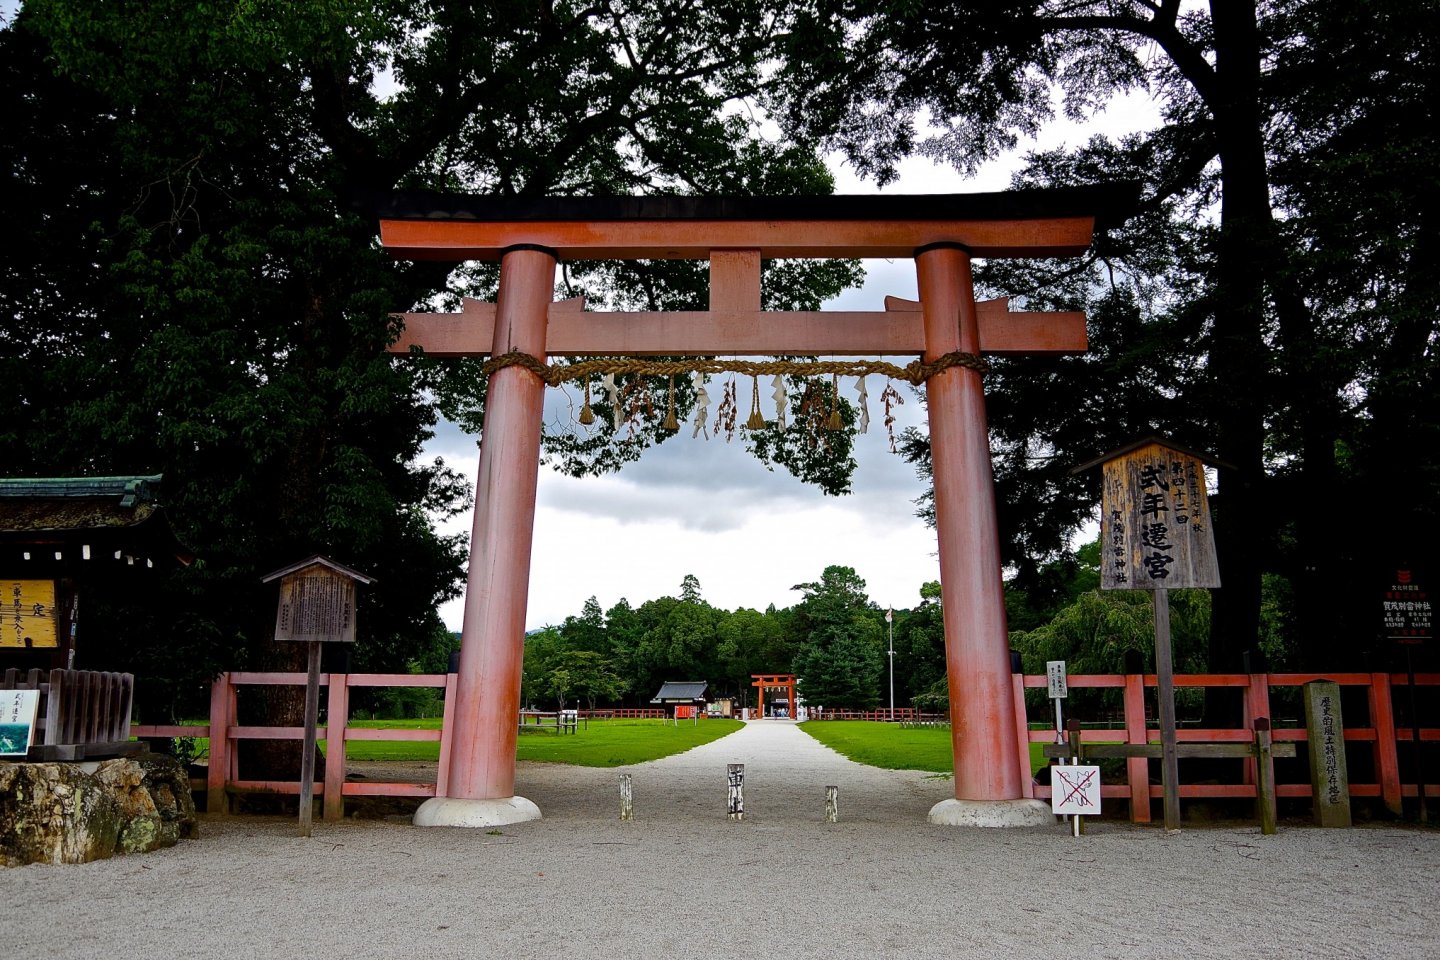 A long approach cuts through a wide open field between these two torii gates